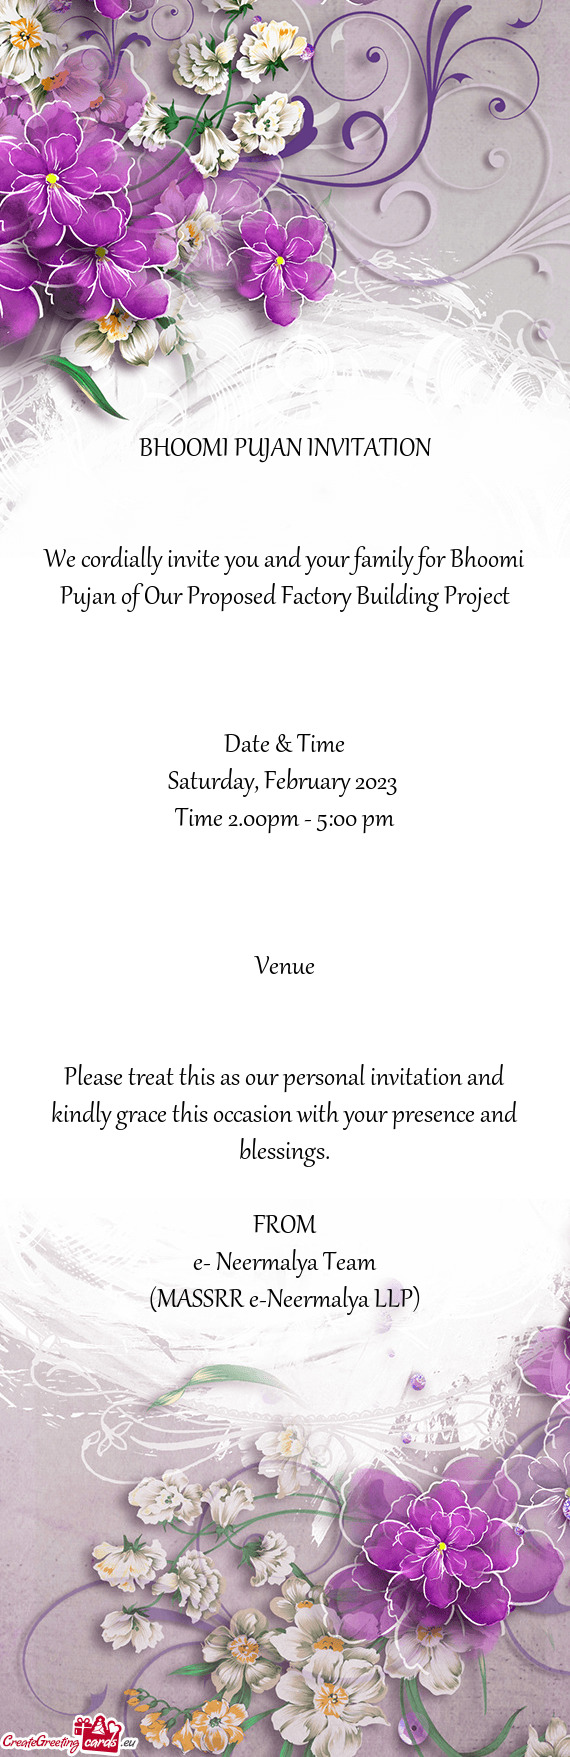 We cordially invite you and your family for Bhoomi Pujan of Our Proposed Factory Building Project